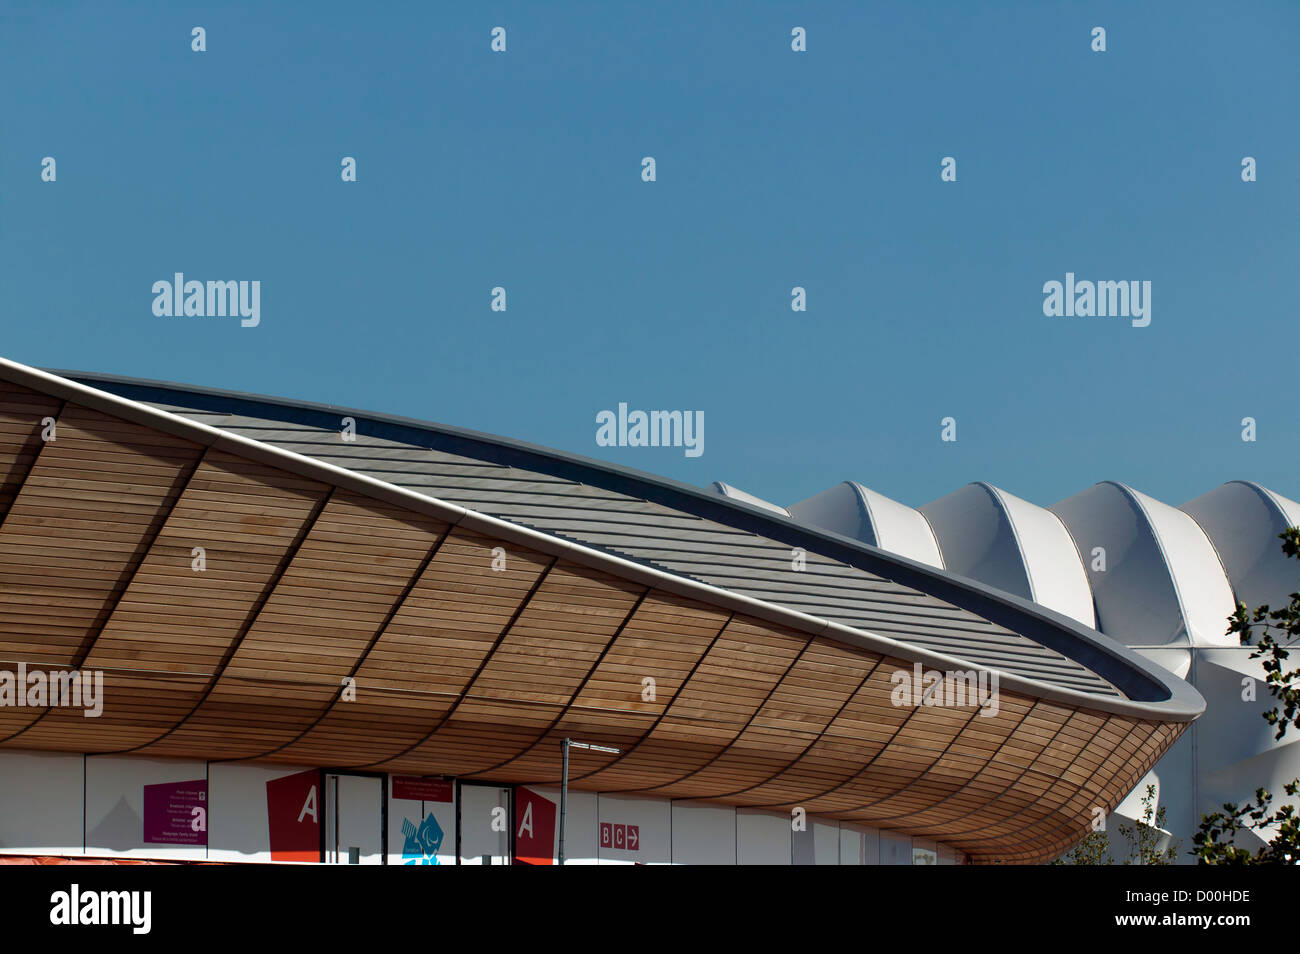 Close-up, telephoto view showing part of the Velodrome, at the Olympic Park, Stratford. Stock Photo